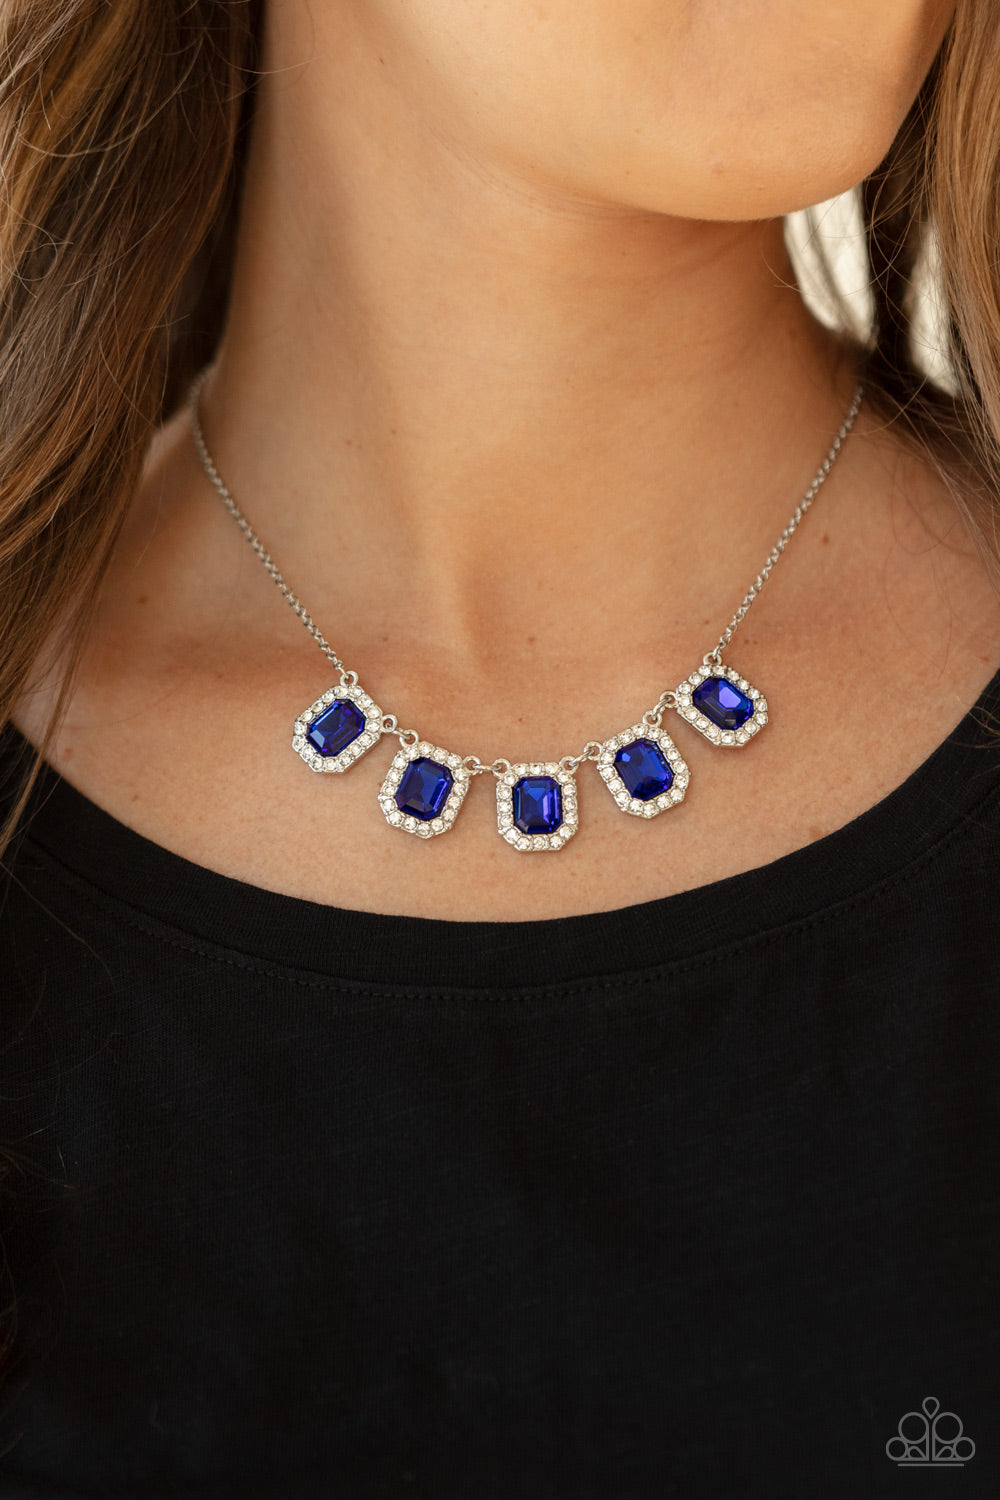 Next Level Luster Blue Necklace - Paparazzi Accessories  Bordered in glassy white rhinestones, sapphire blue emerald style rhinestone encrusted frames gorgeously link below the collar for a timeless fashion. Features an adjustable clasp closure.  All Paparazzi Accessories are lead free and nickel free!  Sold as one individual necklace. Includes one pair of matching earrings.